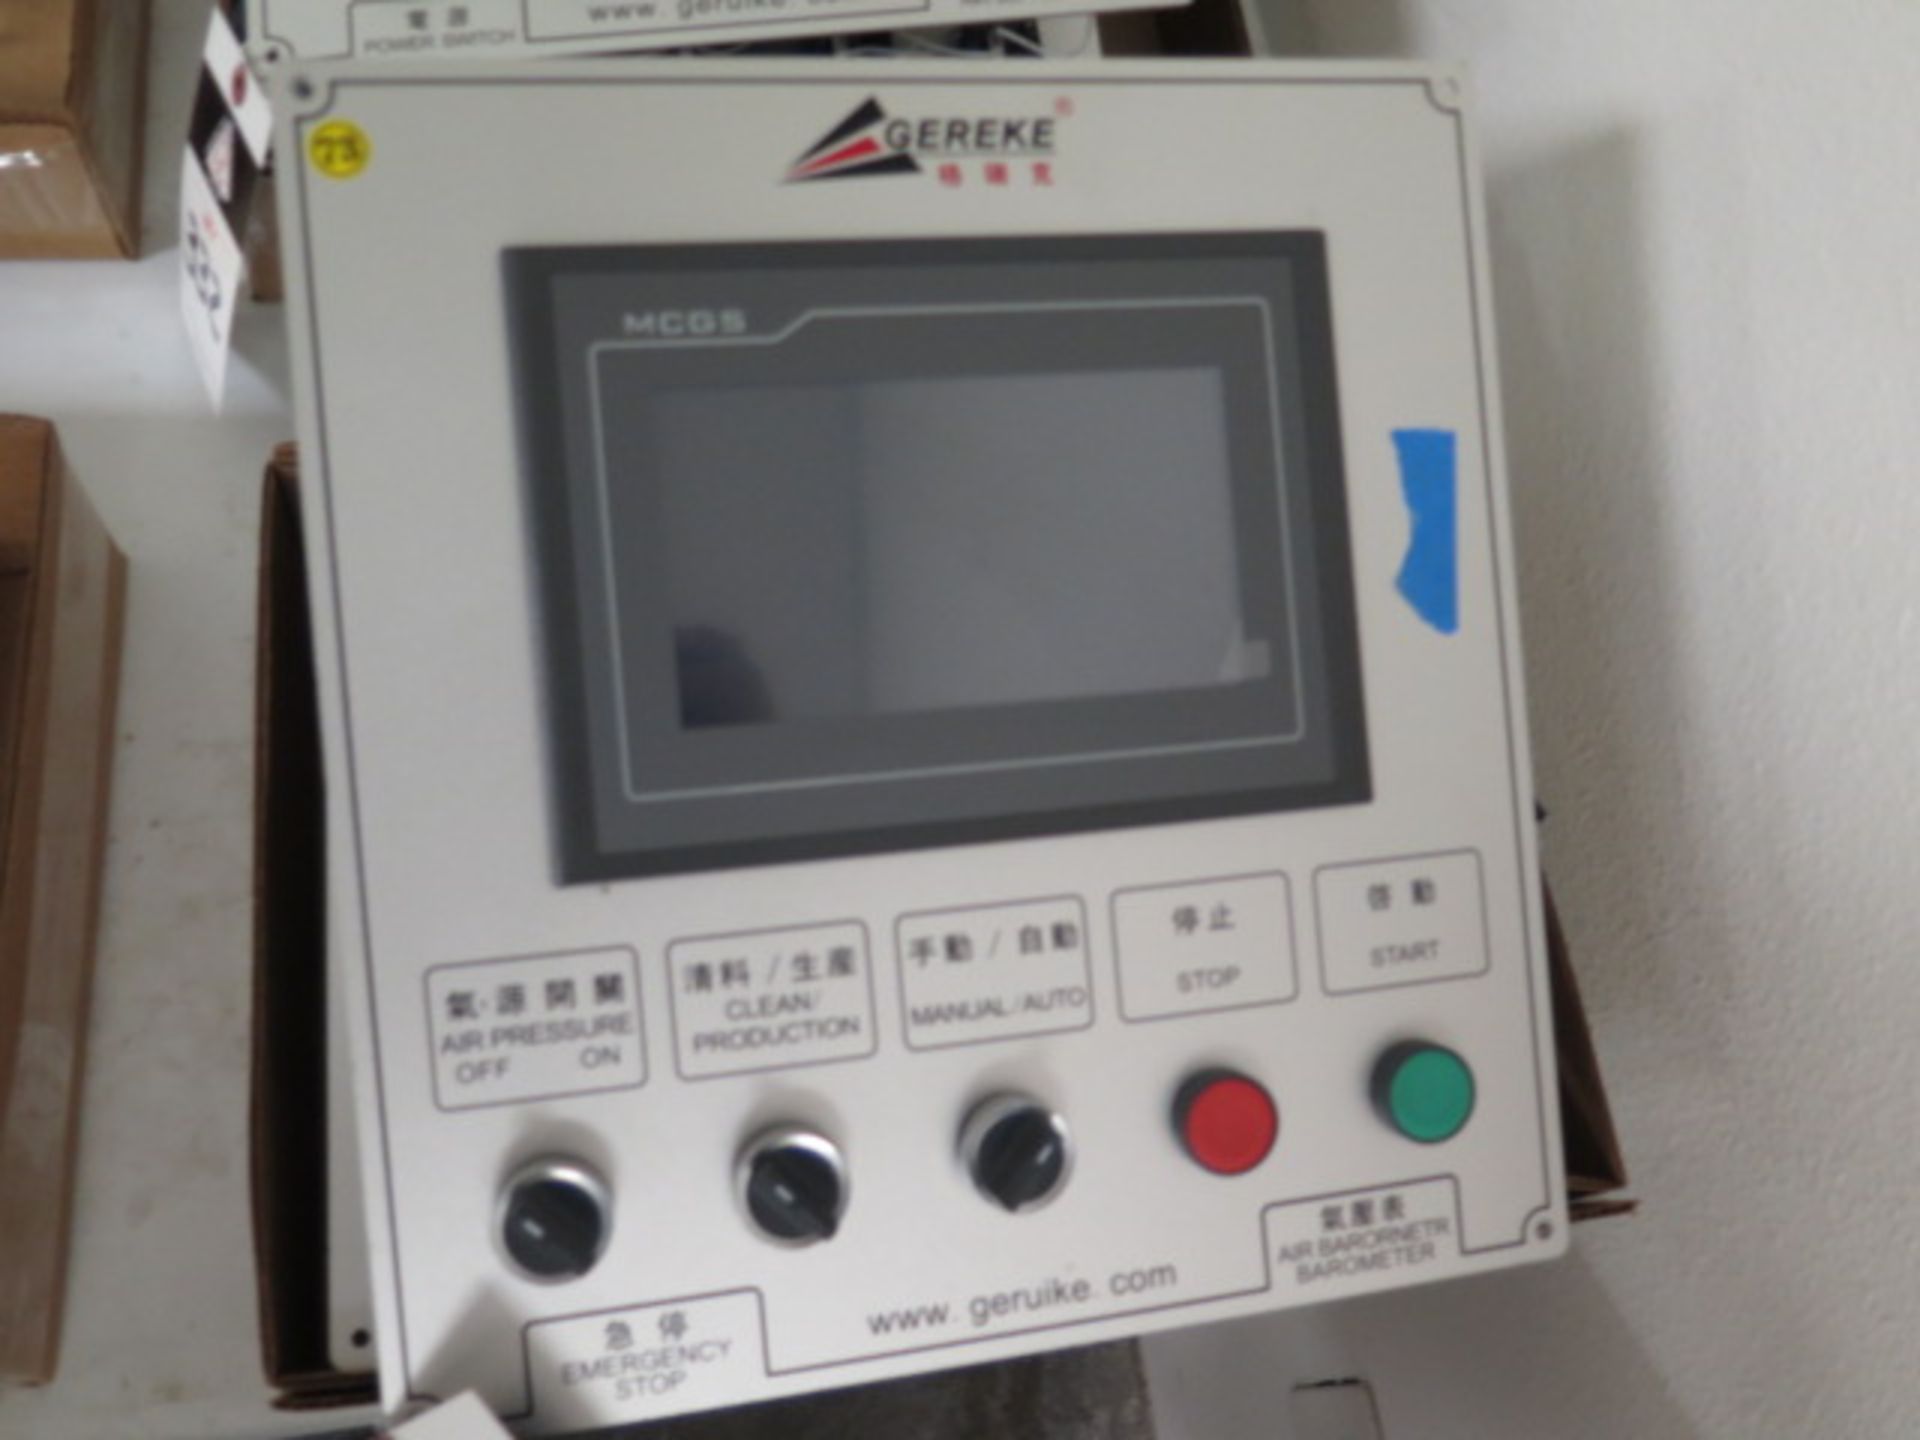 MCGS TPC mdl. TPC7062TD PLC Controllers (3) (SOLD AS-IS - NO WARRANTY) - Image 2 of 4